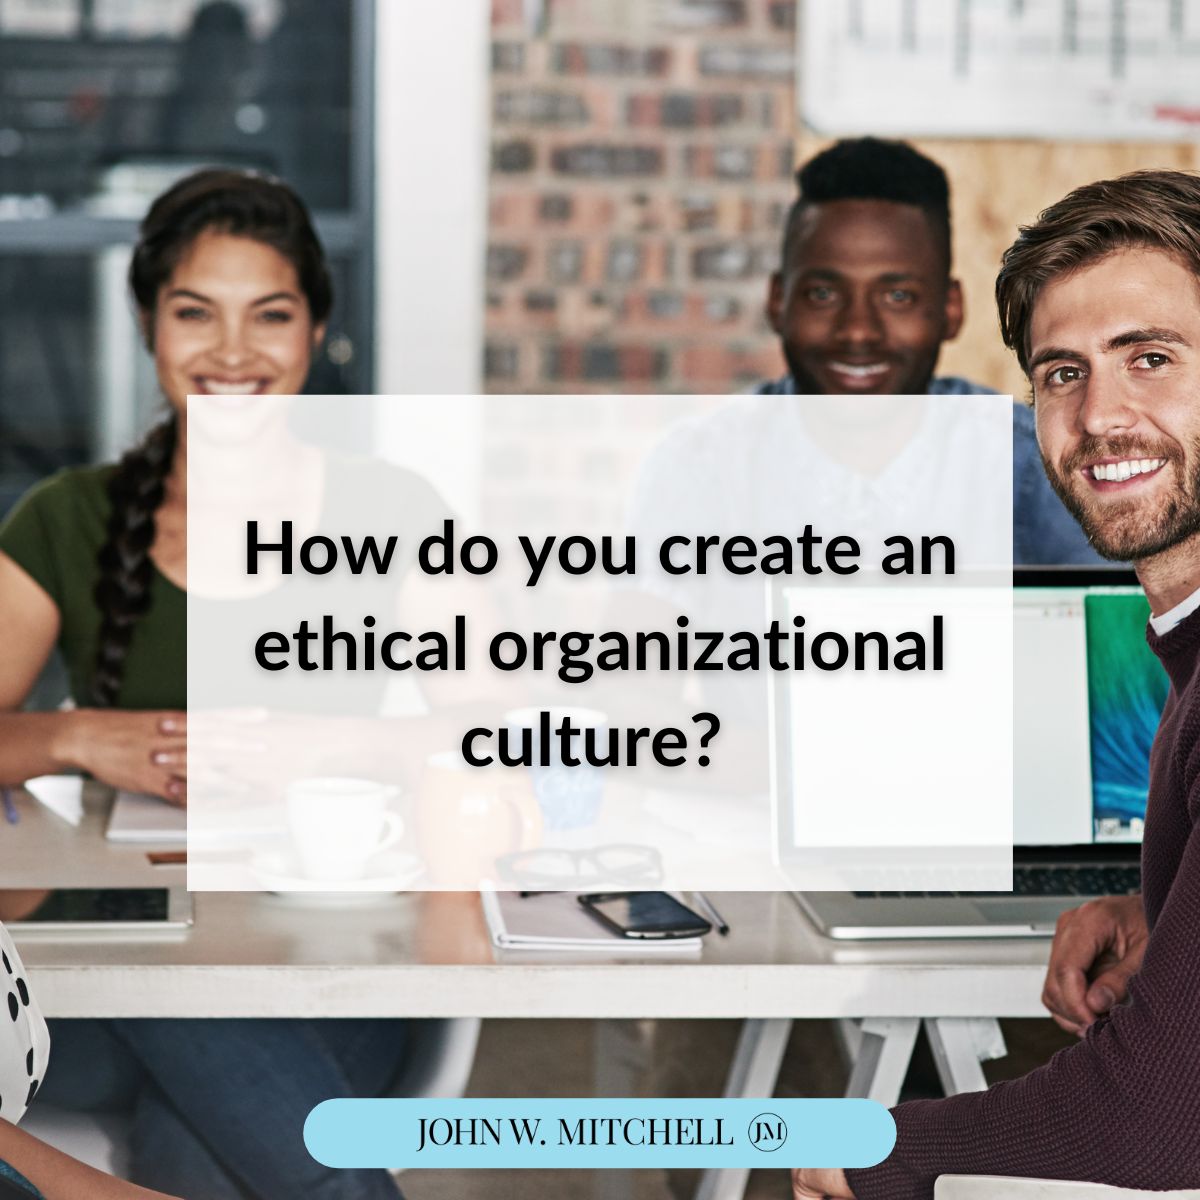 Like a positive #workplaceculture, an ethical culture does not develop in a vacuum. Companies that work to create a strong #ethicalculture motivate everyone to speak and act with honesty and integrity. 

How do you create an ethical organizational culture?